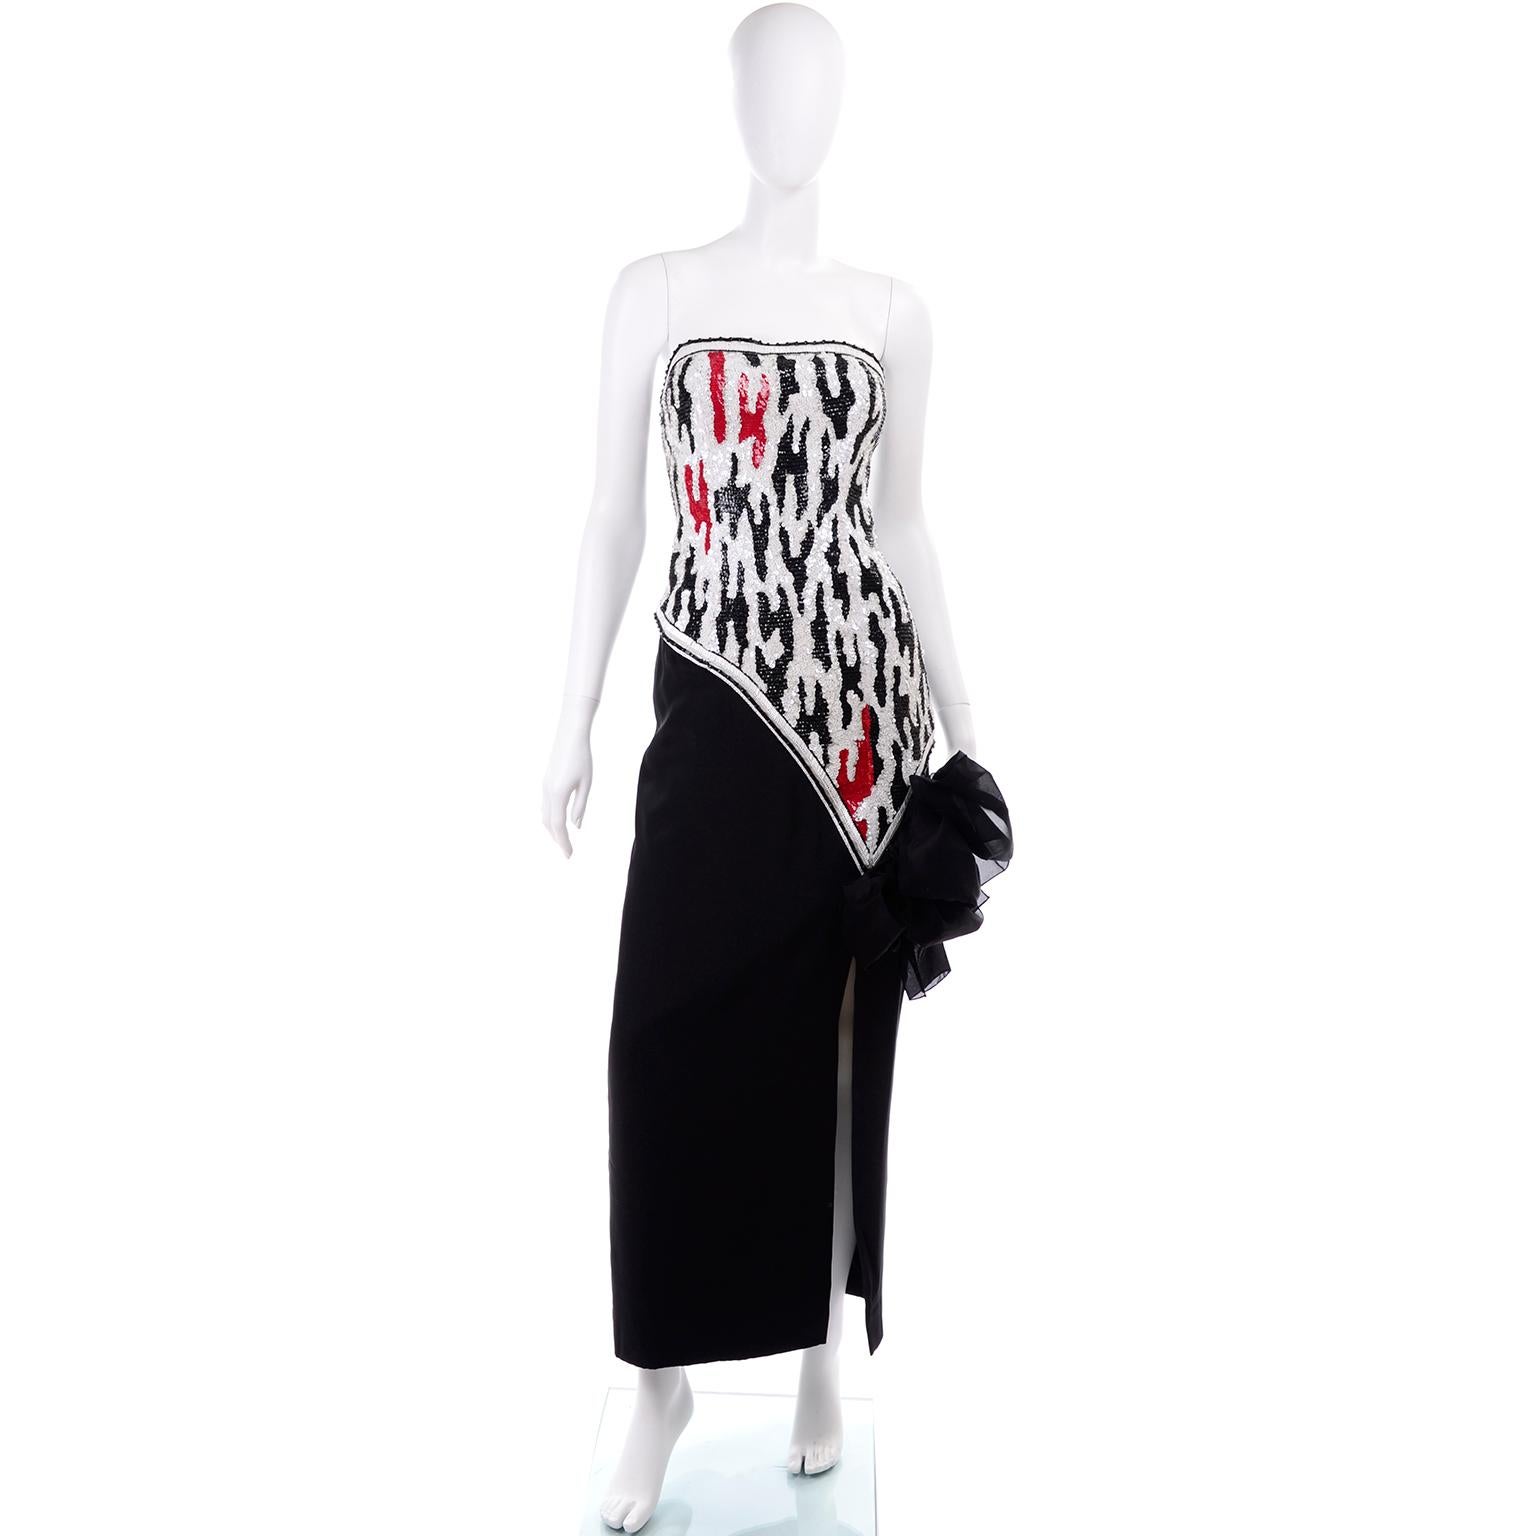 This stunning vintage dress was designed by Ann Lawrence in the 1980's.  The dress has an asymmetrical bodice that is covered with red, black and red sequins in an abstract design, and it is trimmed with black and white bugle and round beads.  The